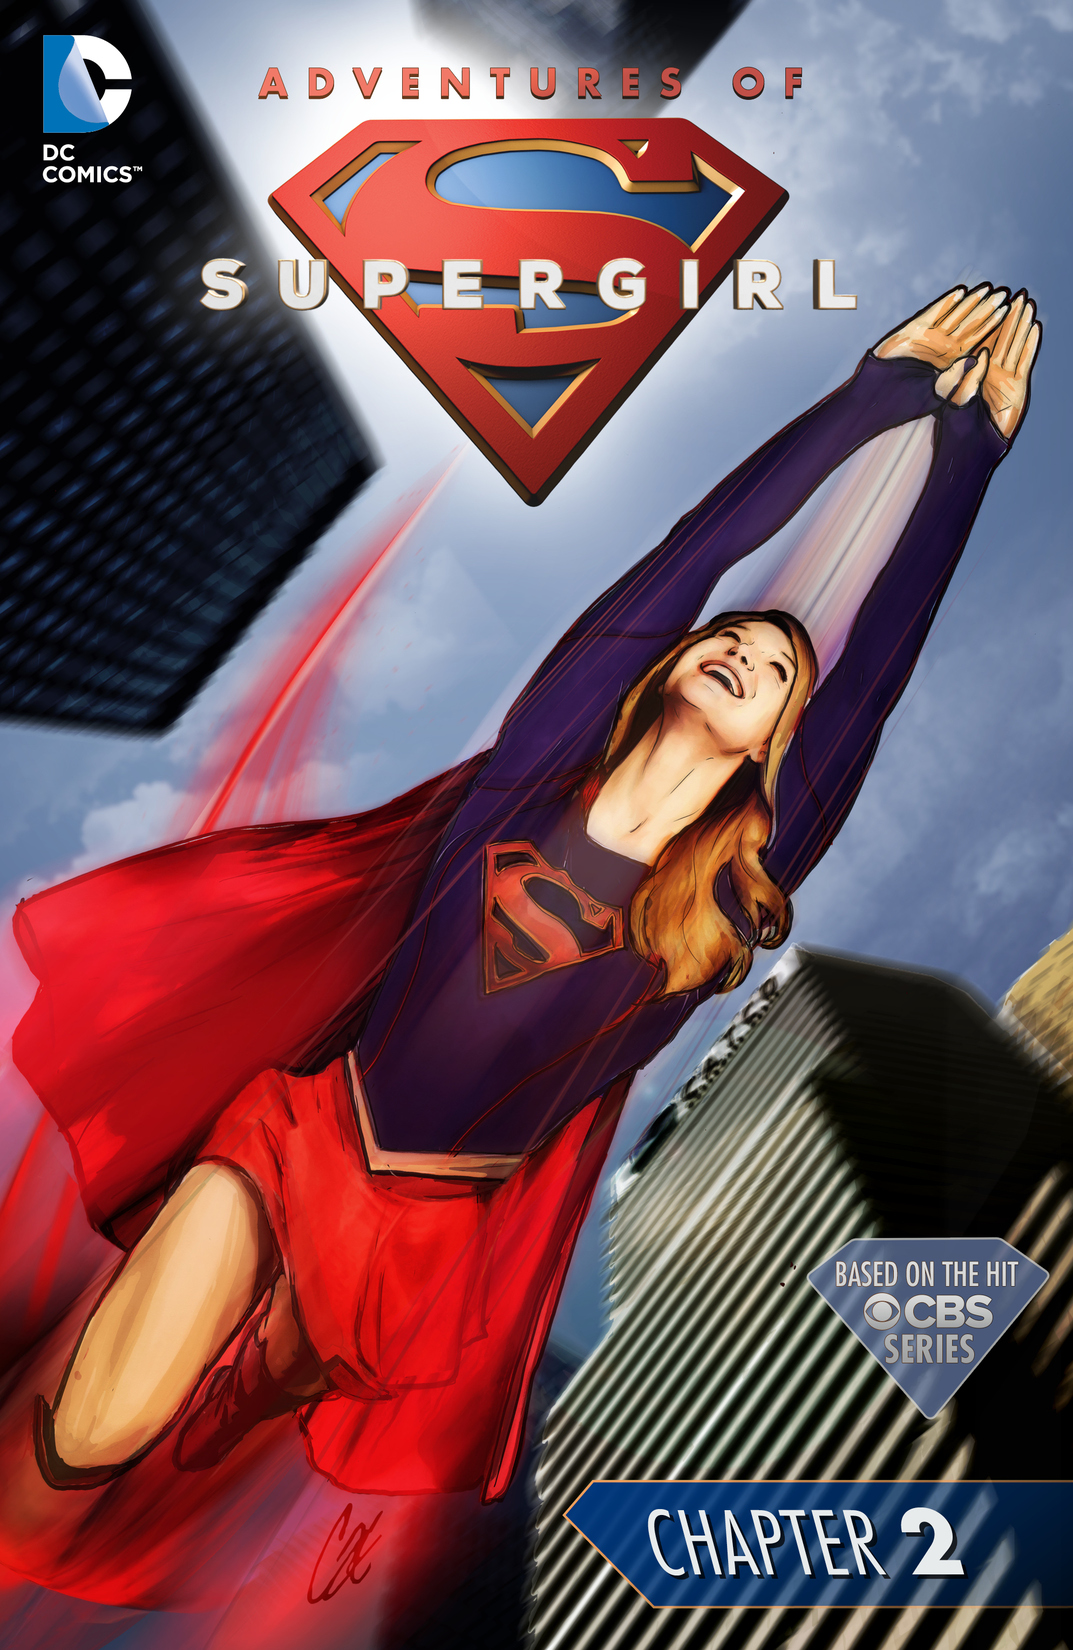 The Adventures of Supergirl #2 preview images